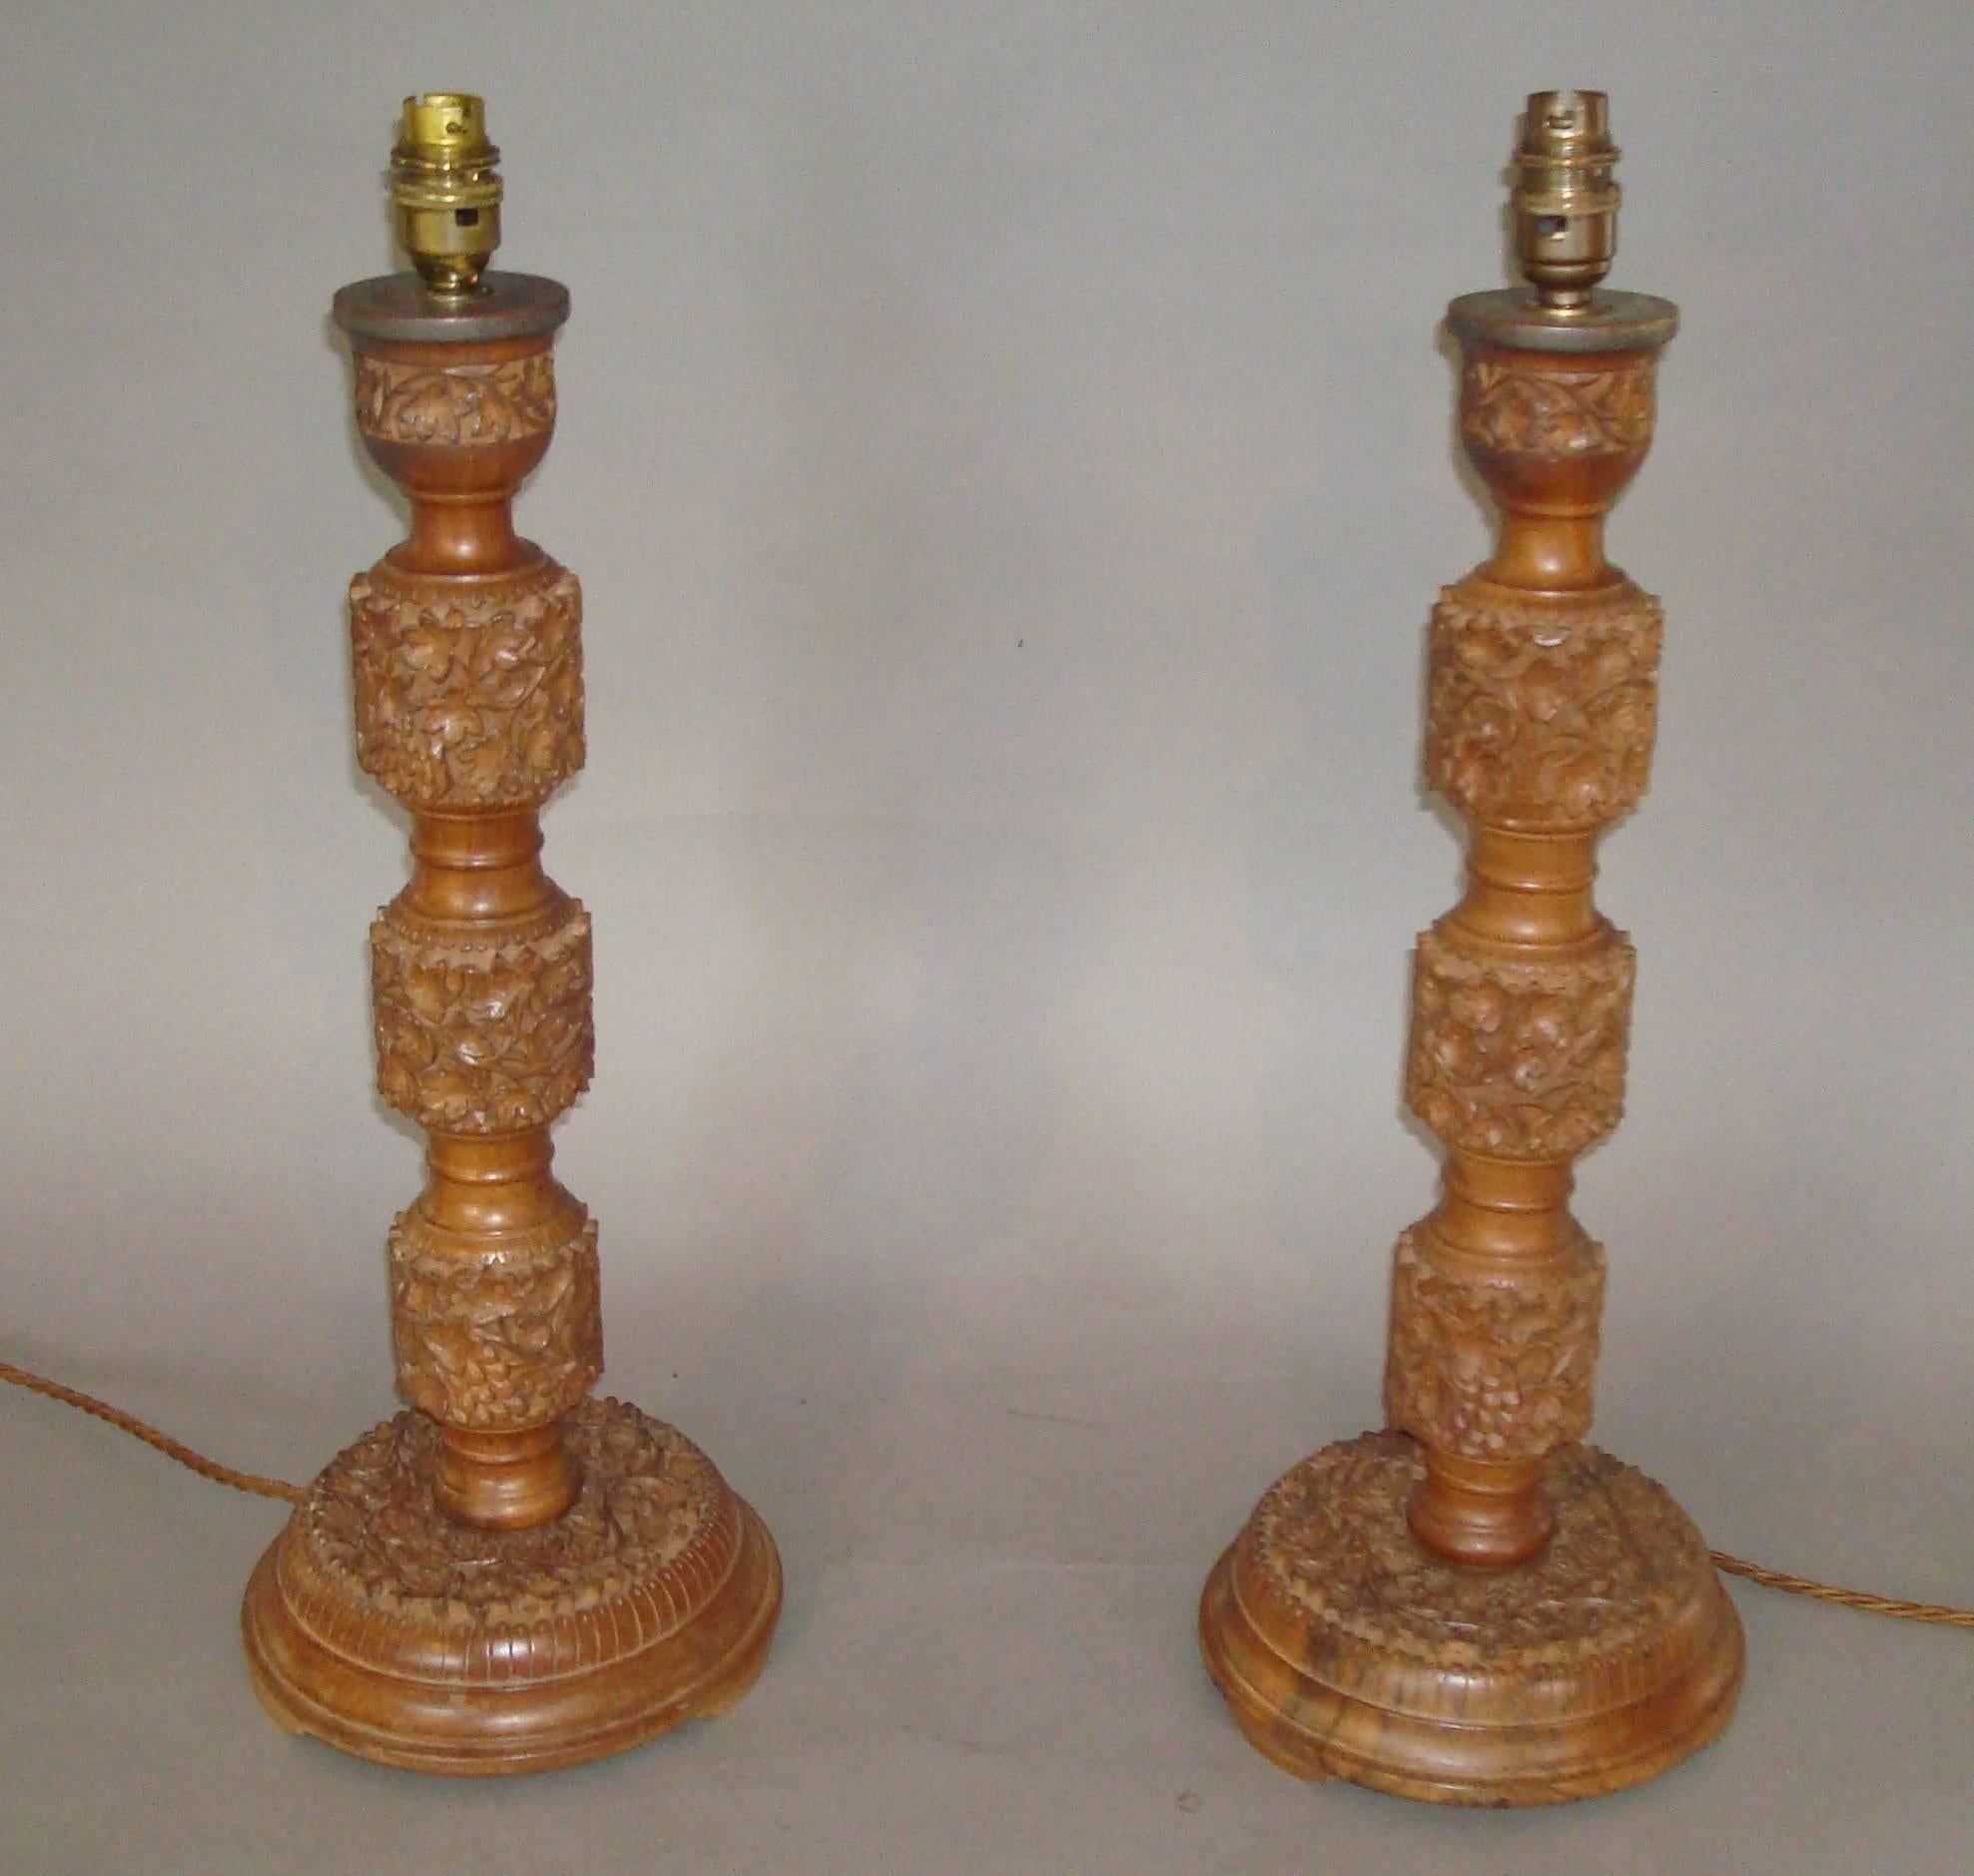 Early 20th Century Pair of Indian Carved Walnut Table Lamps In Excellent Condition For Sale In Moreton-in-Marsh, Gloucestershire